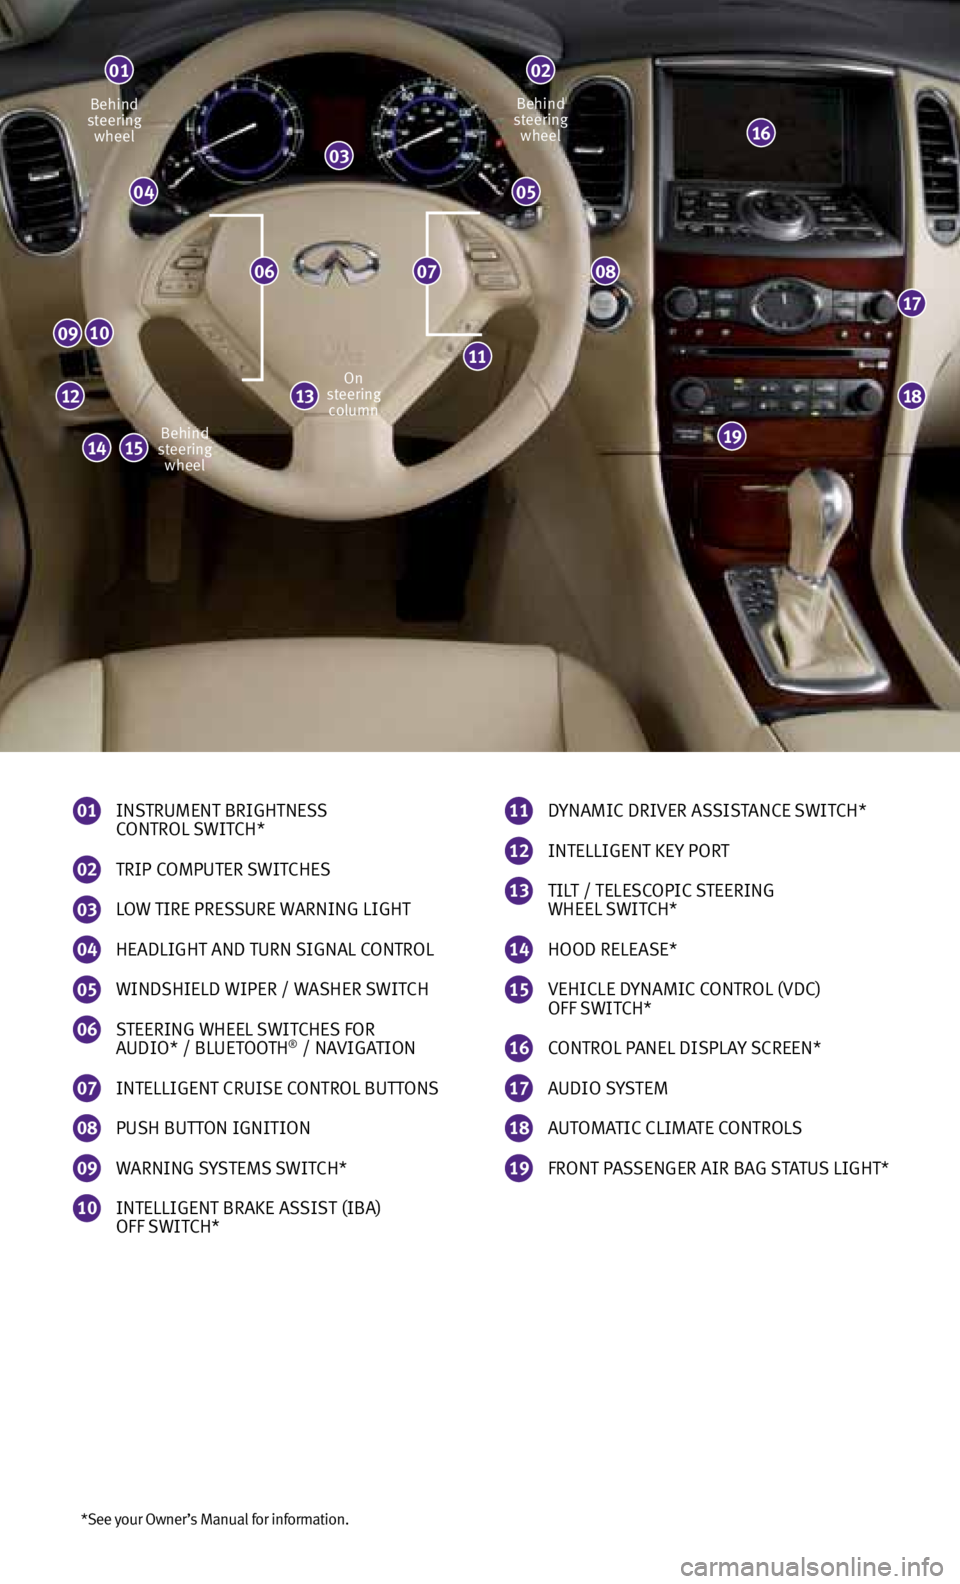 INFINITI EX 2013  Quick Reference Guide *See your Owner’s Manual for information.
01 
INSTRUMENT BRIGHTNESS 
  cONTROL SwITcH*
02 
TRIP  cOMPUTER S wITcHES 
03 
LO w TIRE PRESSURE  wARNING LIGHT 
04  
HEADLIGHT AND TURN SIGNAL  cONTROL
05